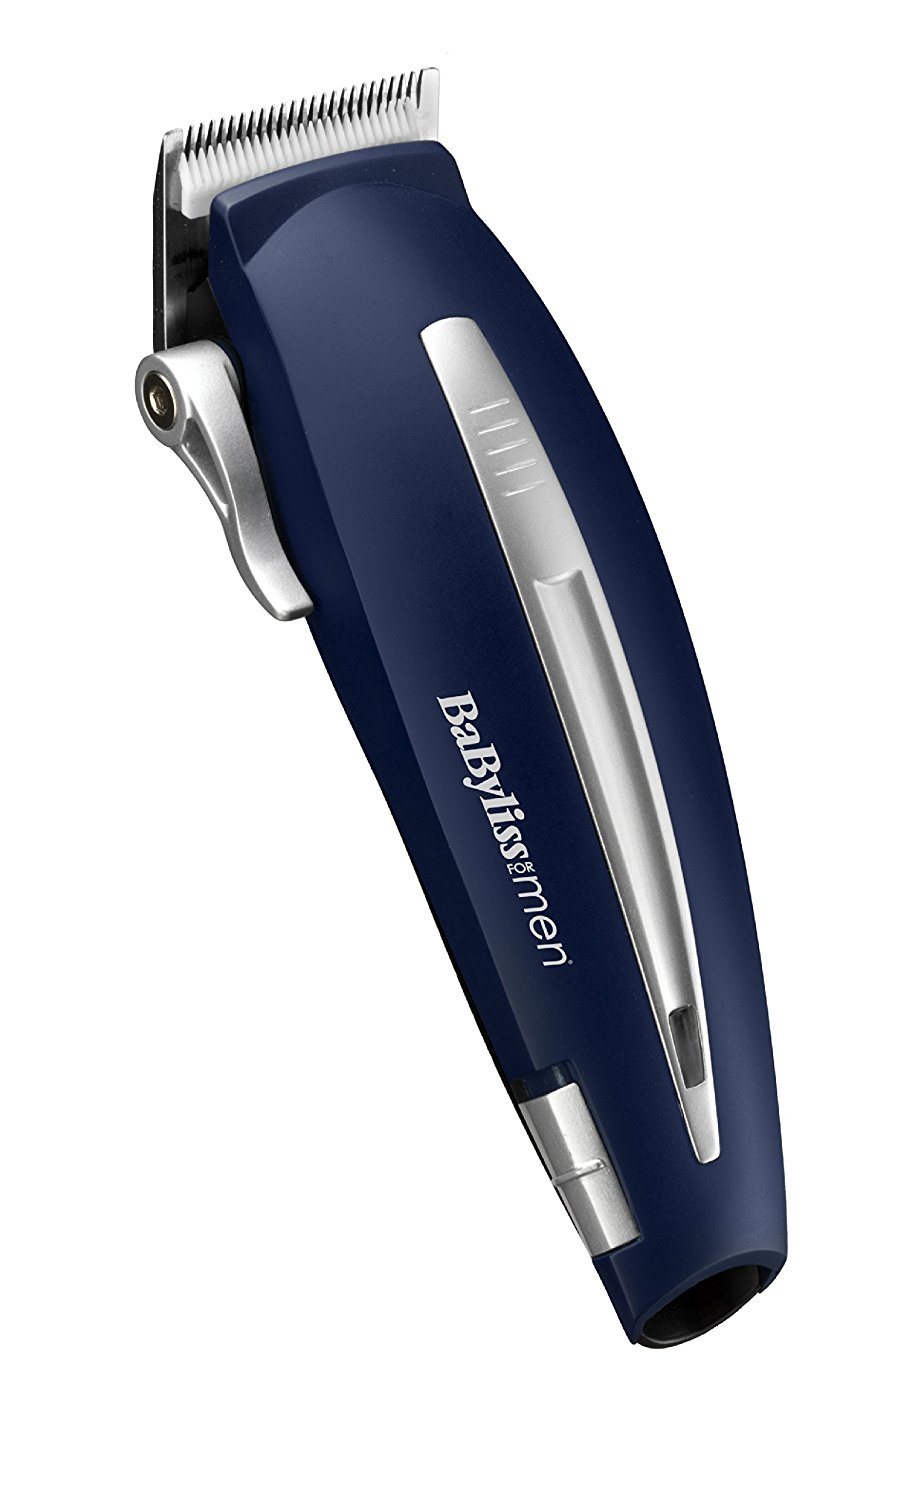 number five rated babyliss hair clippers